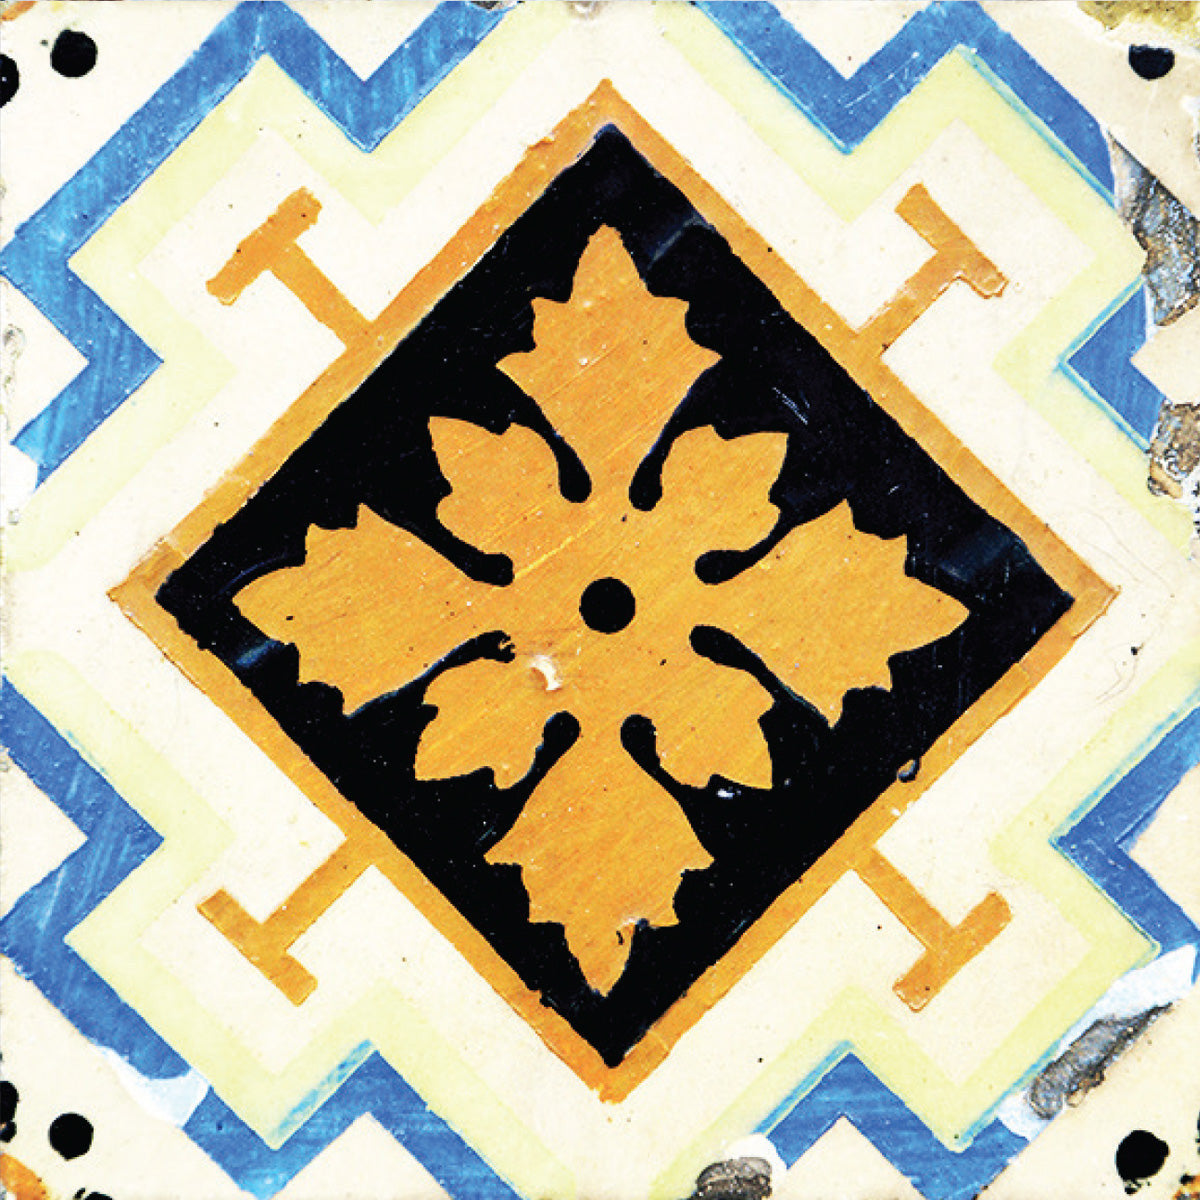 7" x 7" Gold Snowflake Peel and Stick Removable Tiles